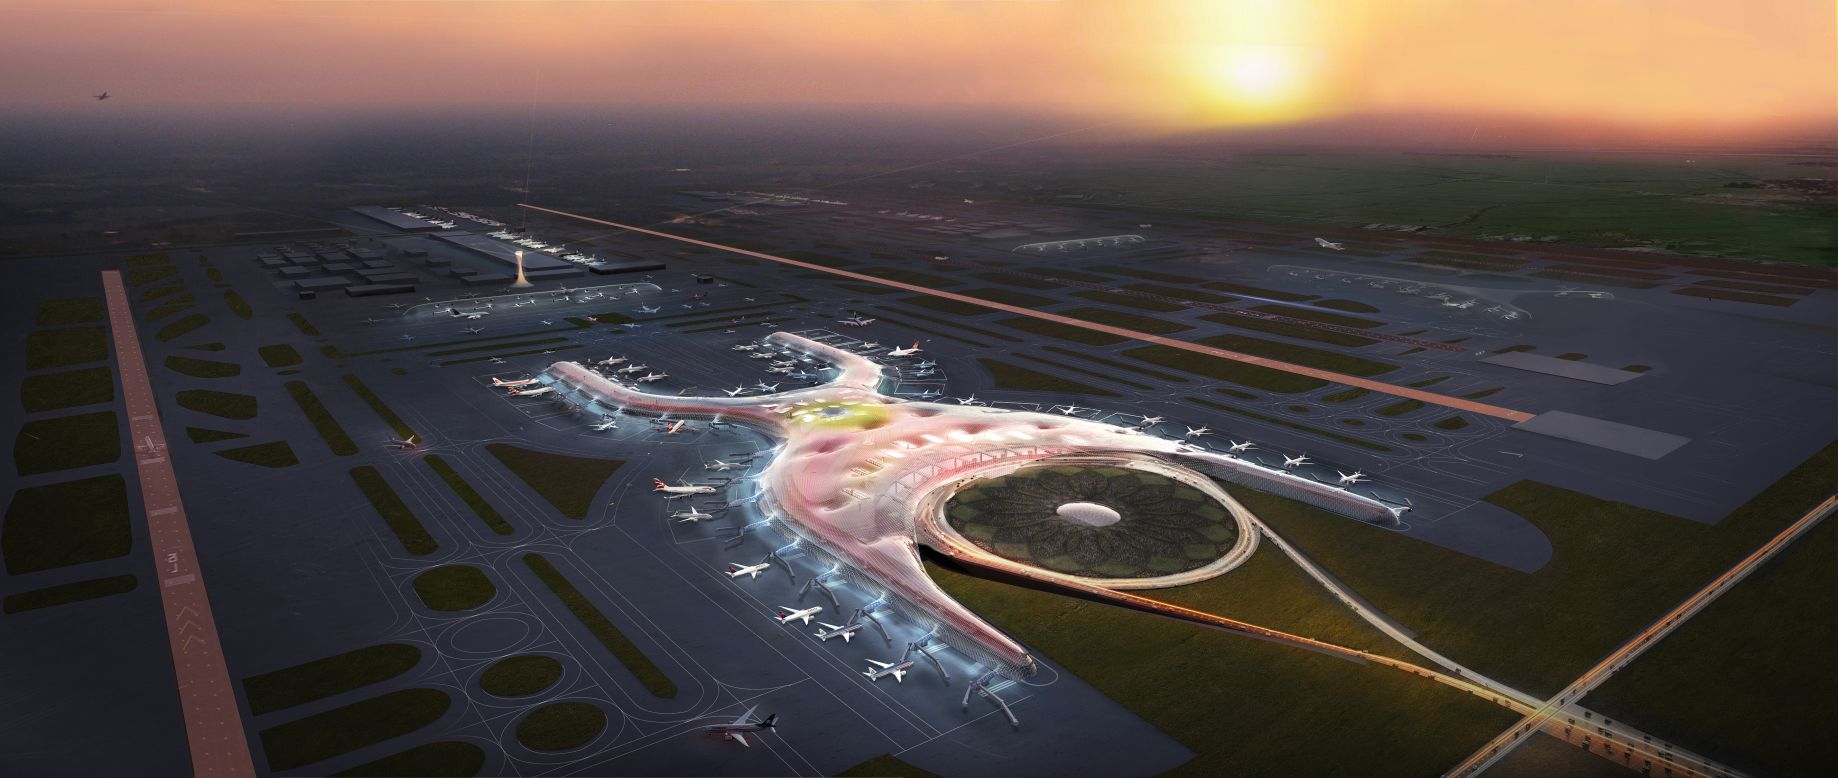 This year will see work start on <a href="http://www.fosterandpartners.com/news/archive/2014/09/httpwwwfosterandpartnerscomnewsarchive201409foster-and-partners-to-design-new-international-airport-for-mexico-city/" target="_blank" target="_blank">Mexico City International Airport</a>. A collaboration of world-renowned architects, it's designed to be the world's most sustainable airport when it opens in 2018.